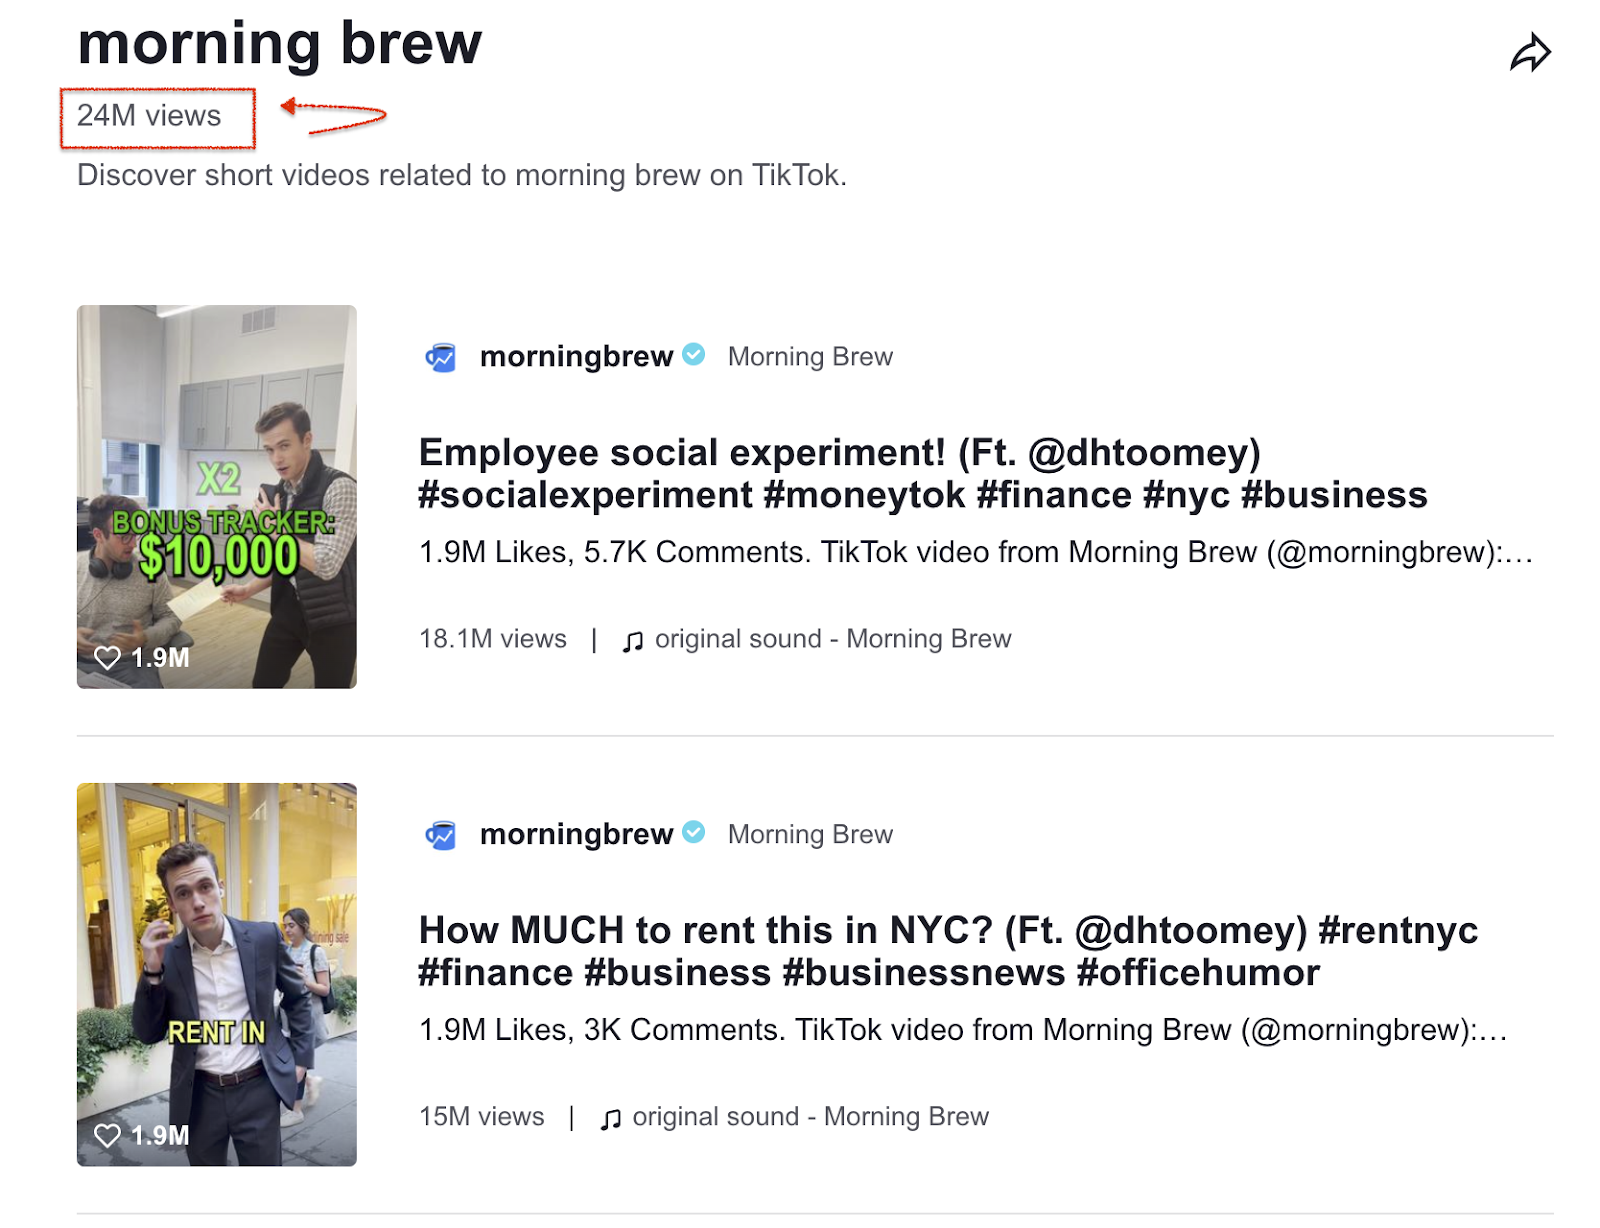 Morning Brew creates short-form informative and educational videos on TikTok that have generated over 24 million views